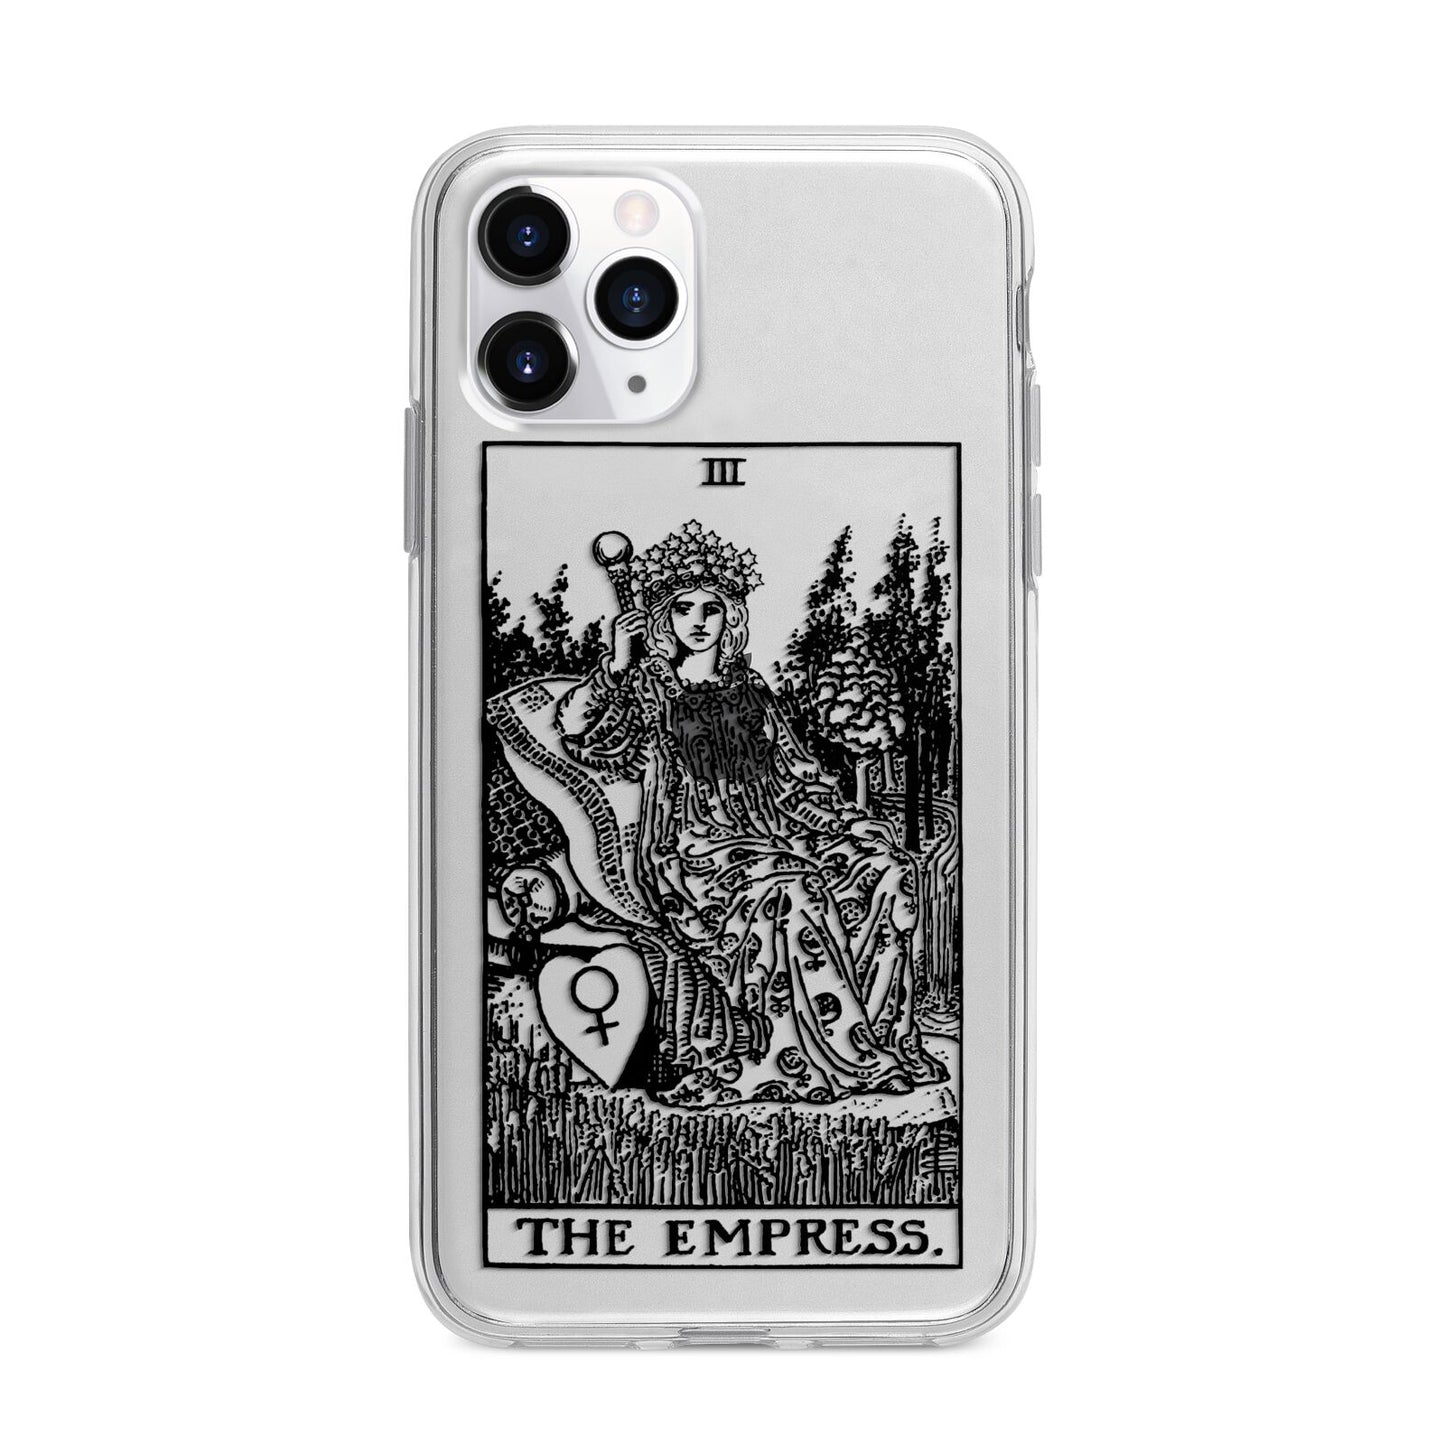 The Empress Monochrome Tarot Card Apple iPhone 11 Pro Max in Silver with Bumper Case